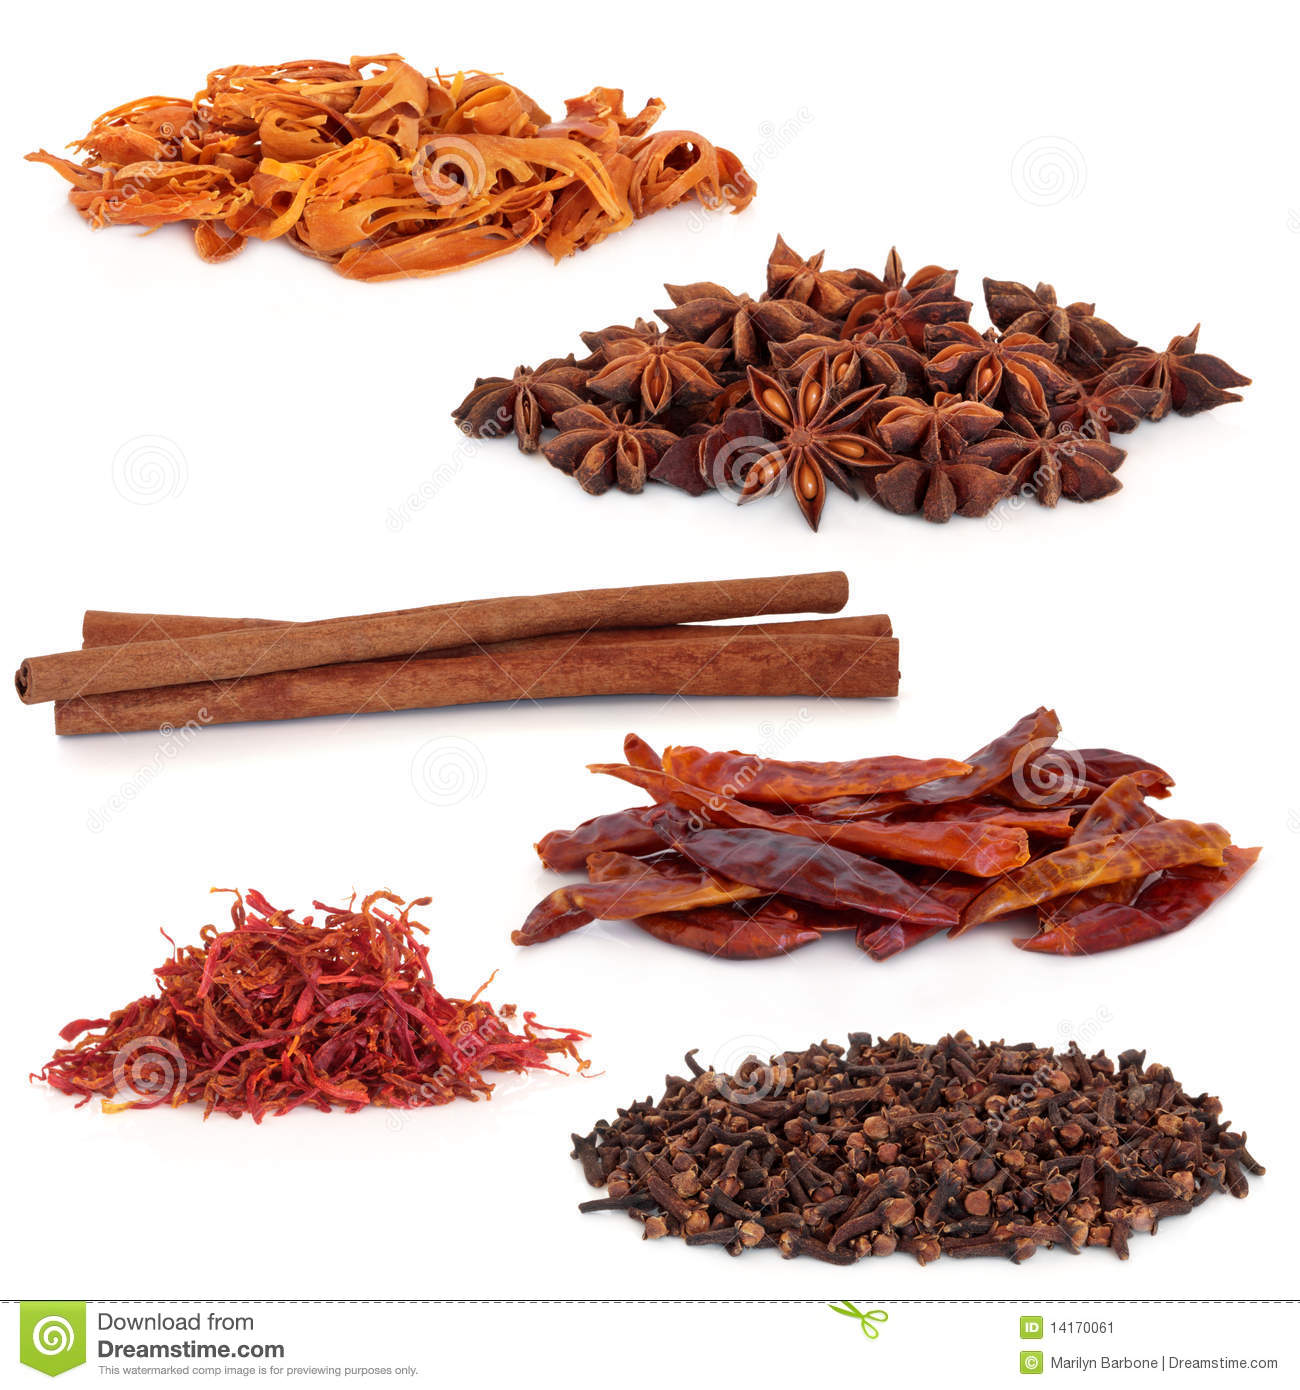 Spices Selection Of Cloves Saffron Chillies Cinnamon Star Anise